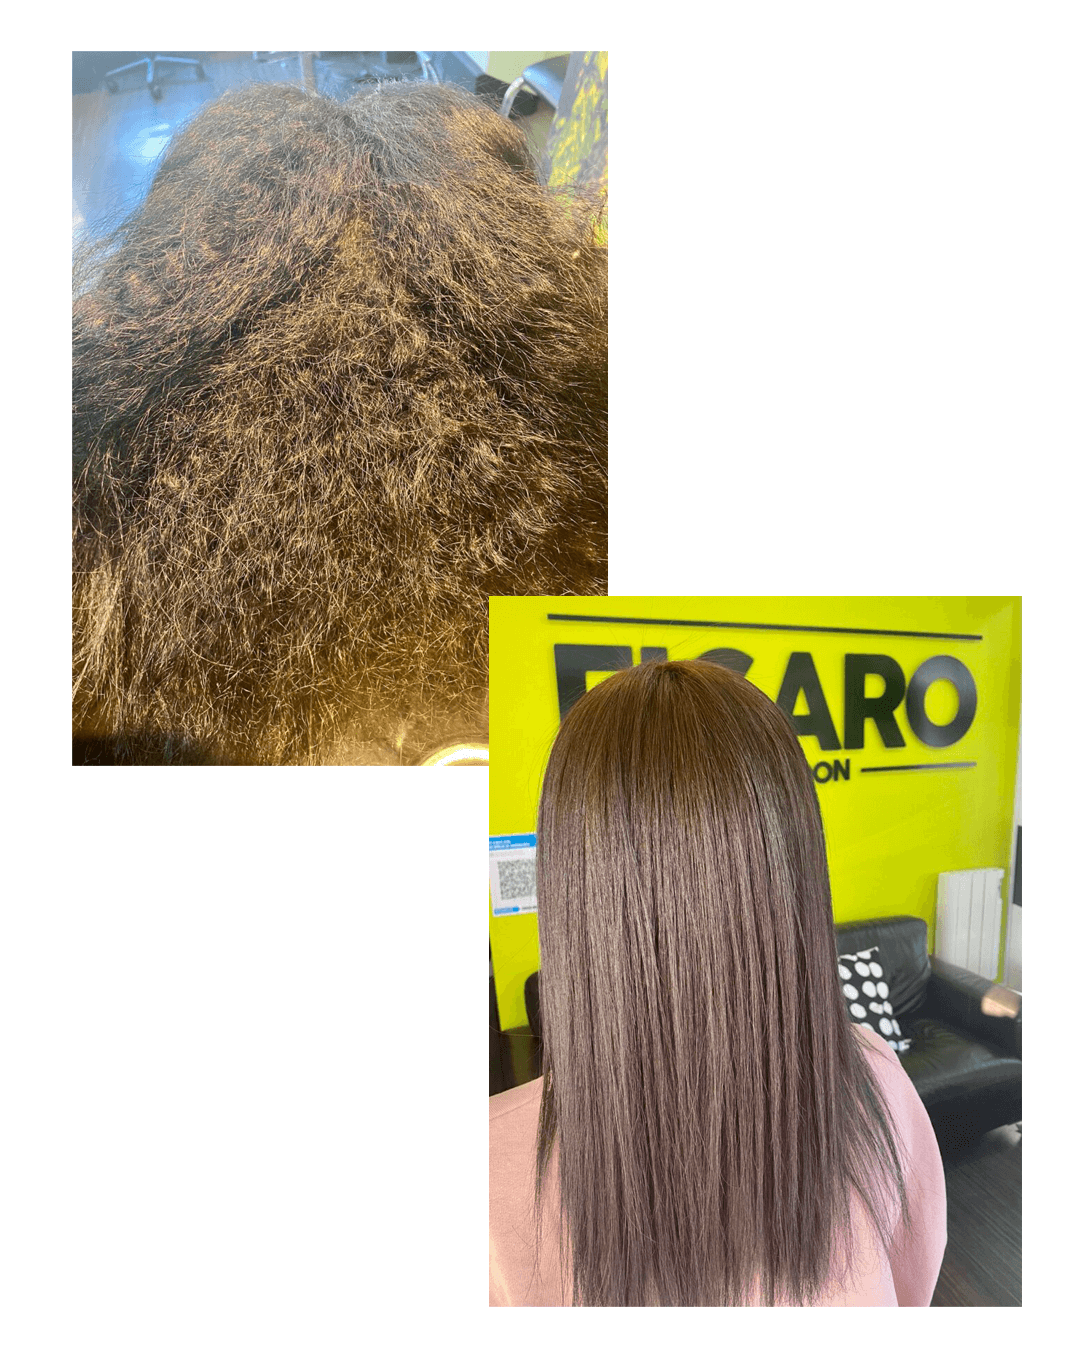 Before and After Keratin Kerasilk Treatment on a patient